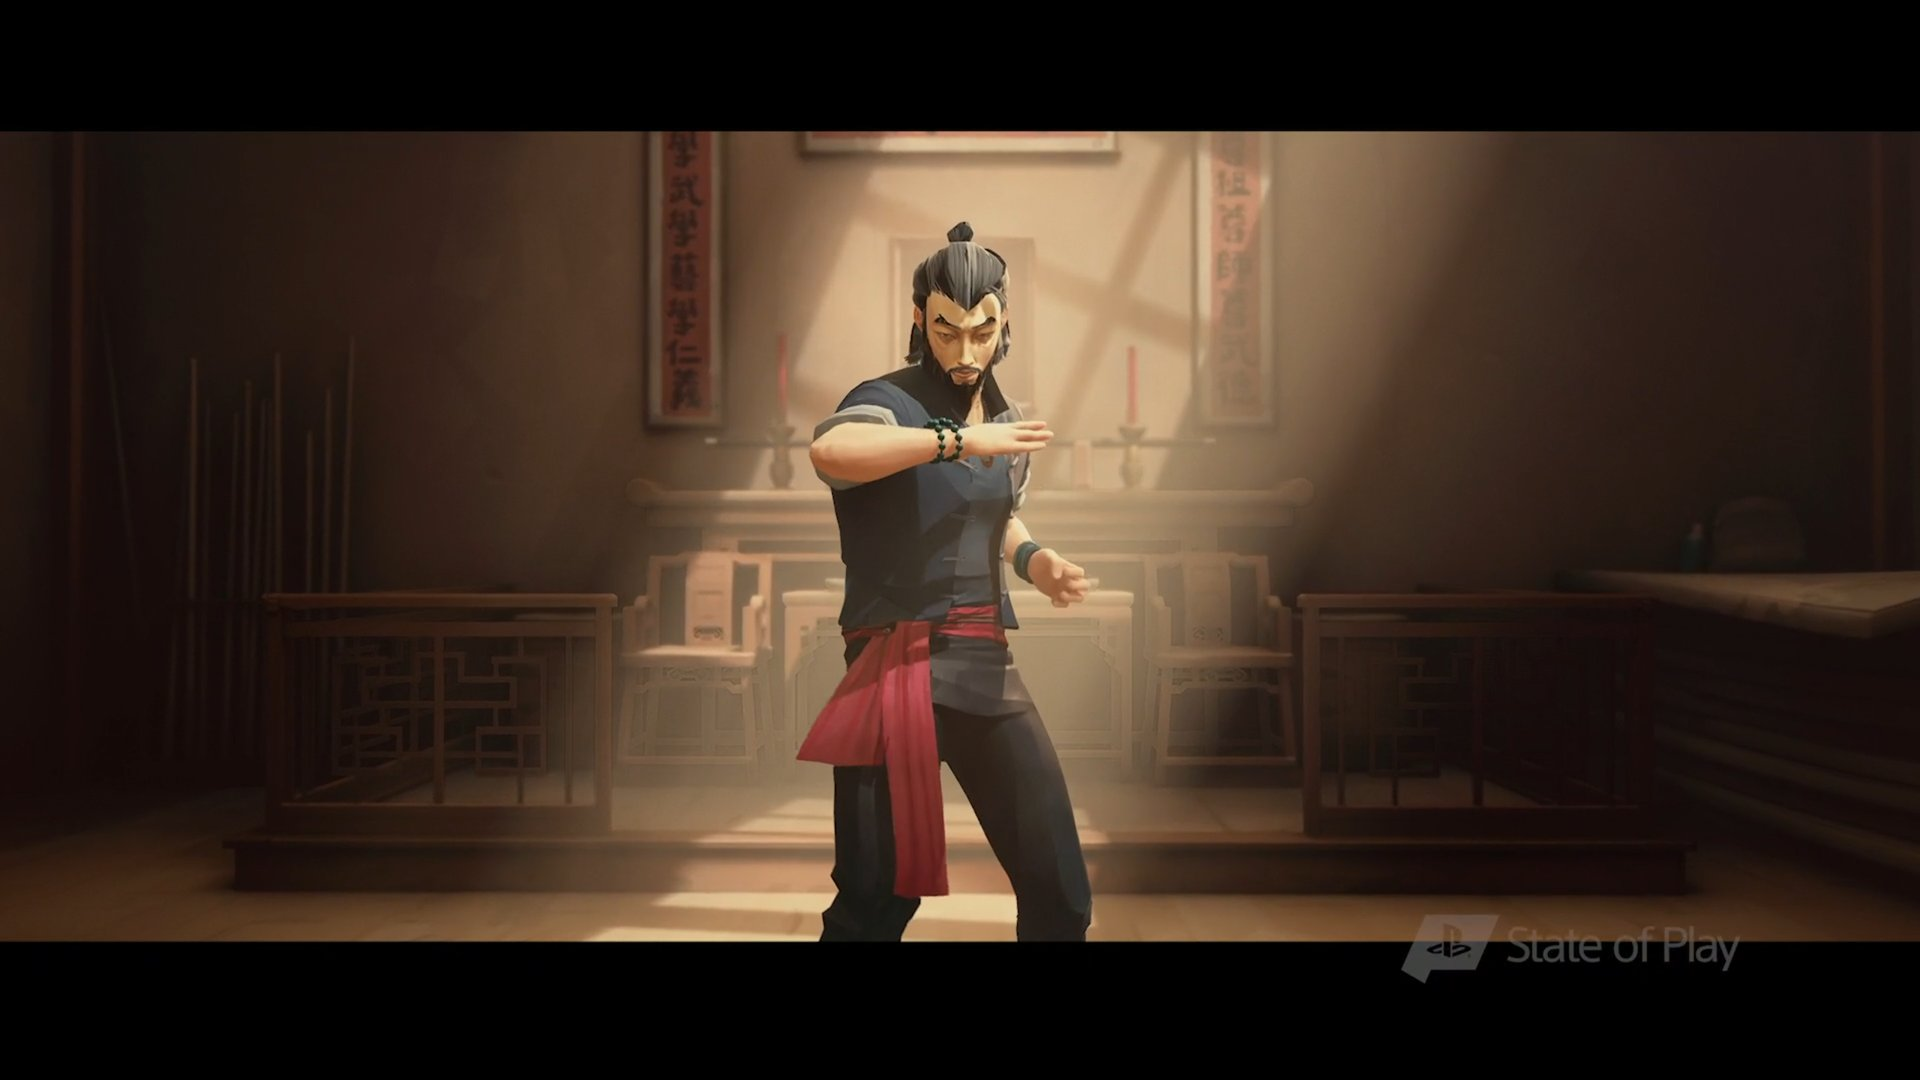 Action brawler game SIFU announced for PS4, PS5 and PC